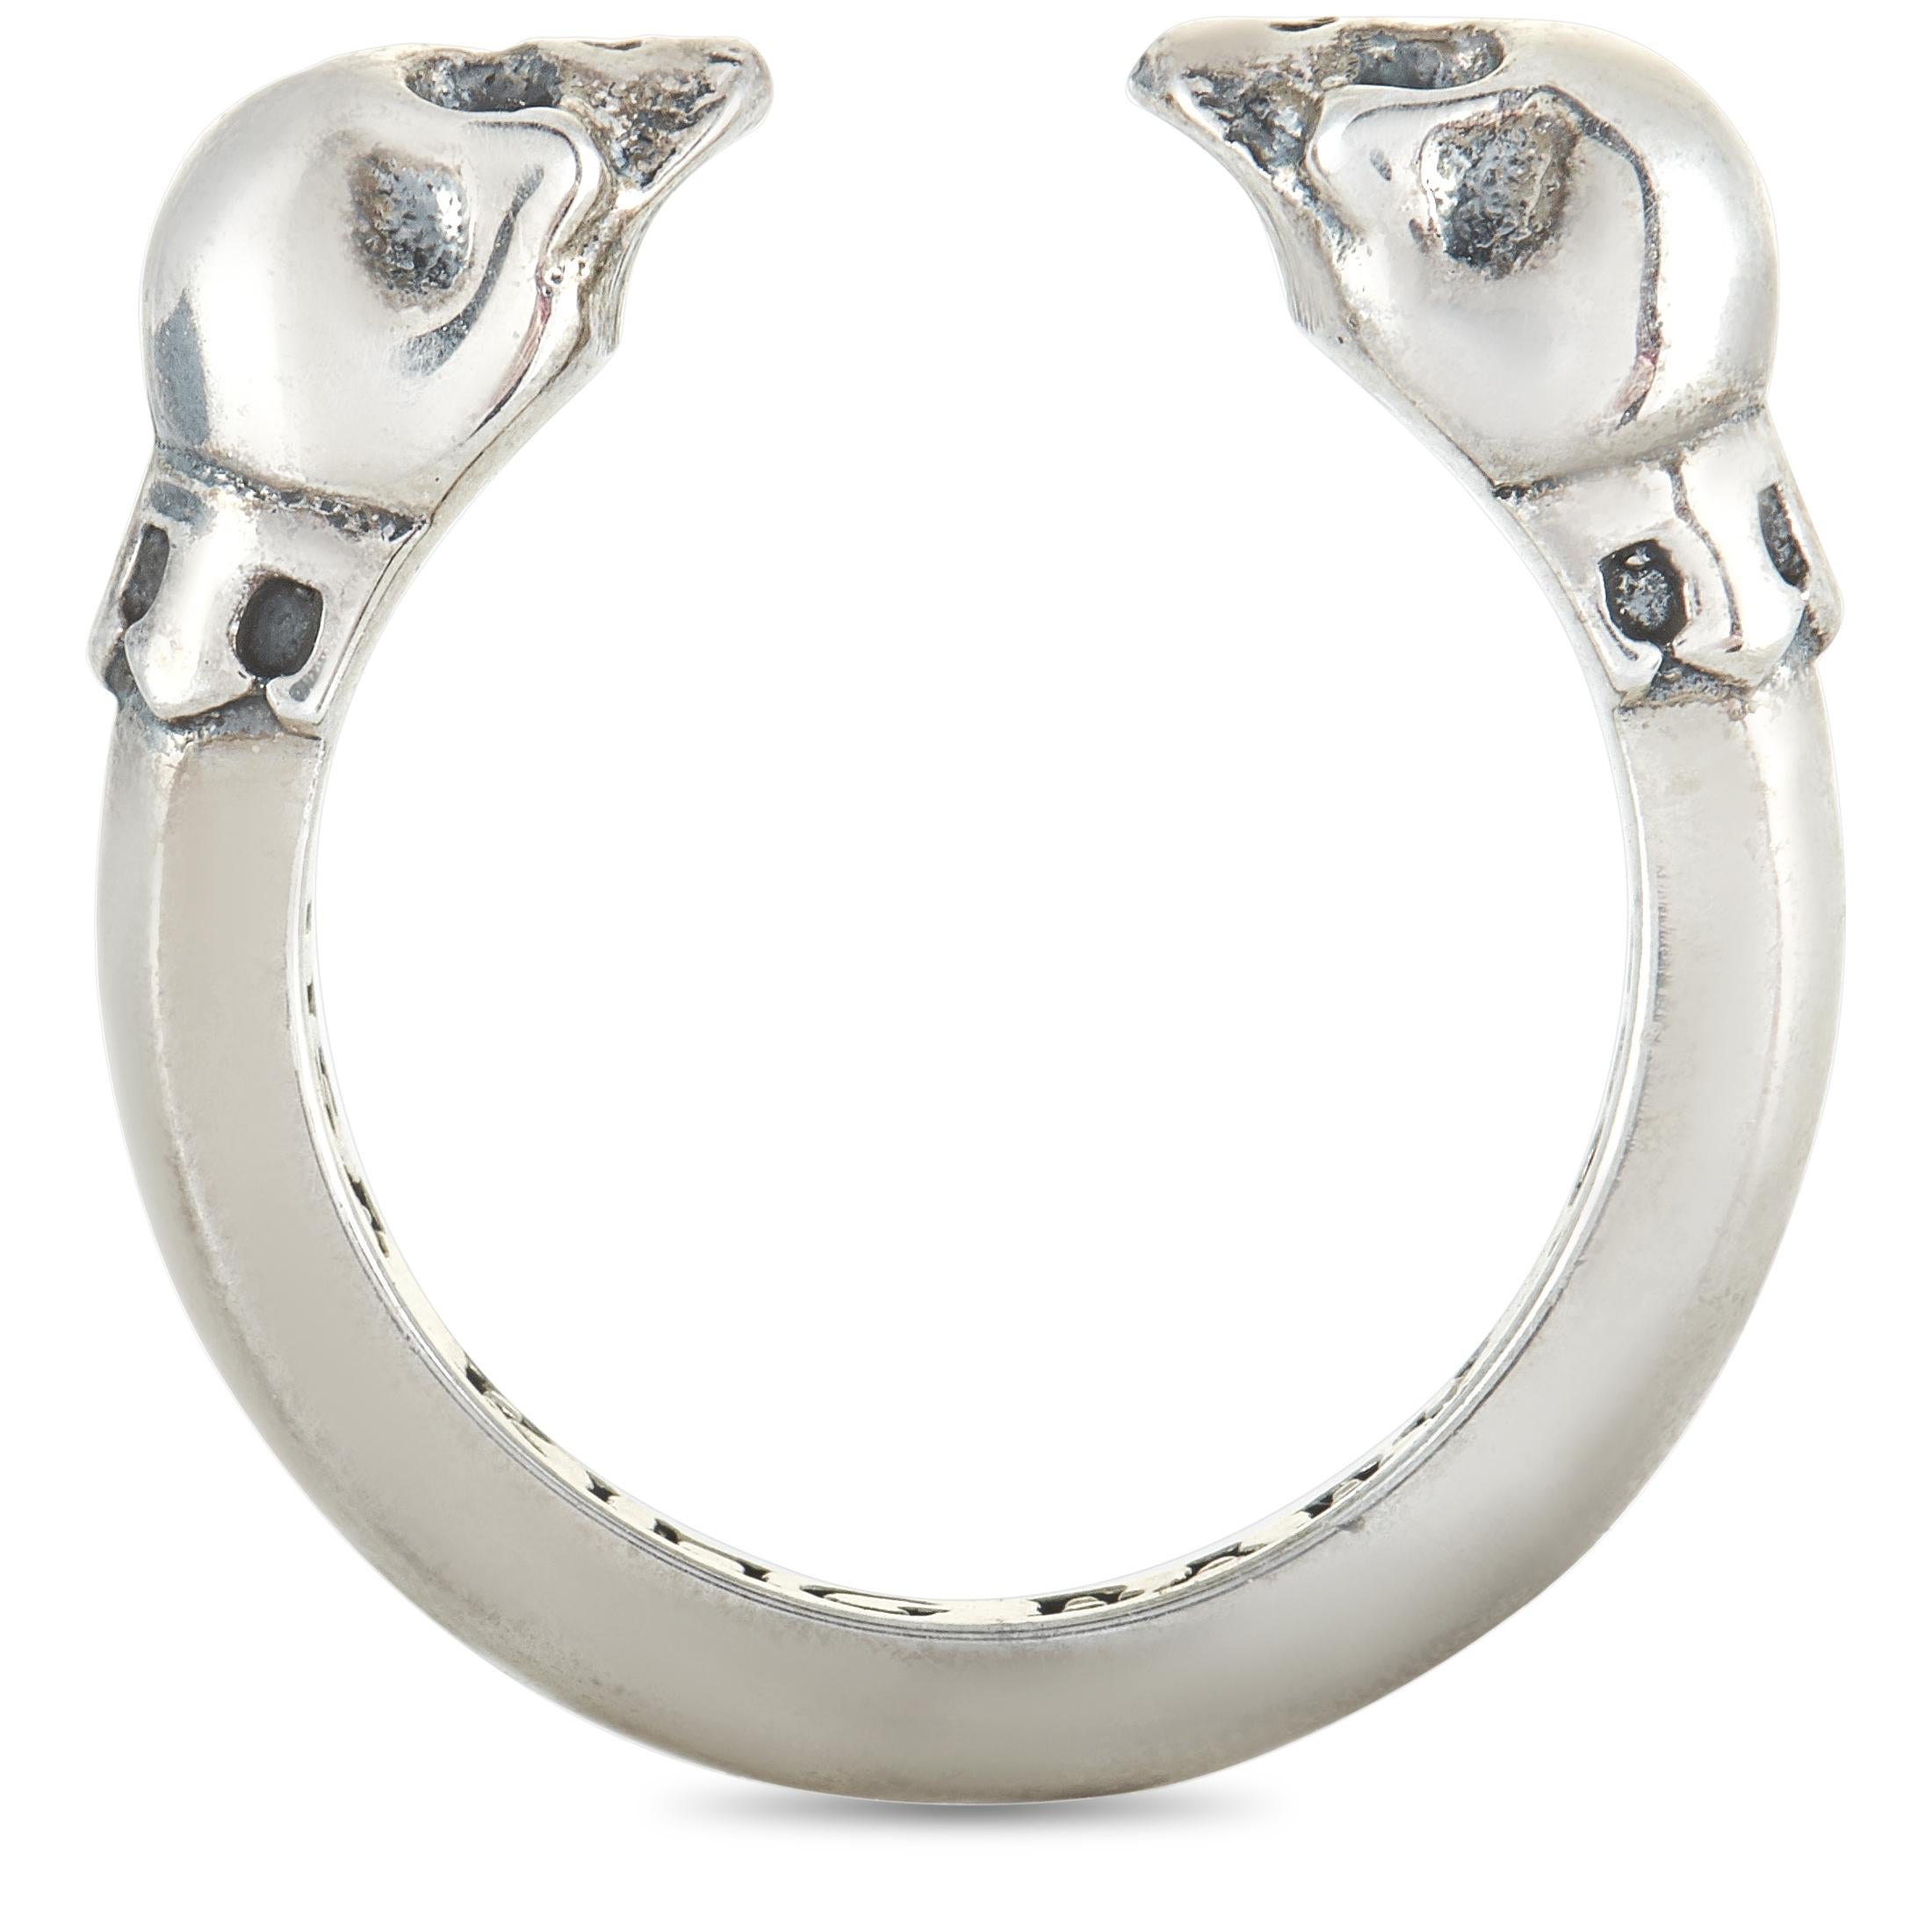 This King Baby open ring is crafted from sterling silver and weighs 5.9 grams. The ring boasts band thickness of 1 mm and top height of 2 mm, while top dimensions measure 20 by 5 mm.

Offered in brand new condition, this item includes the